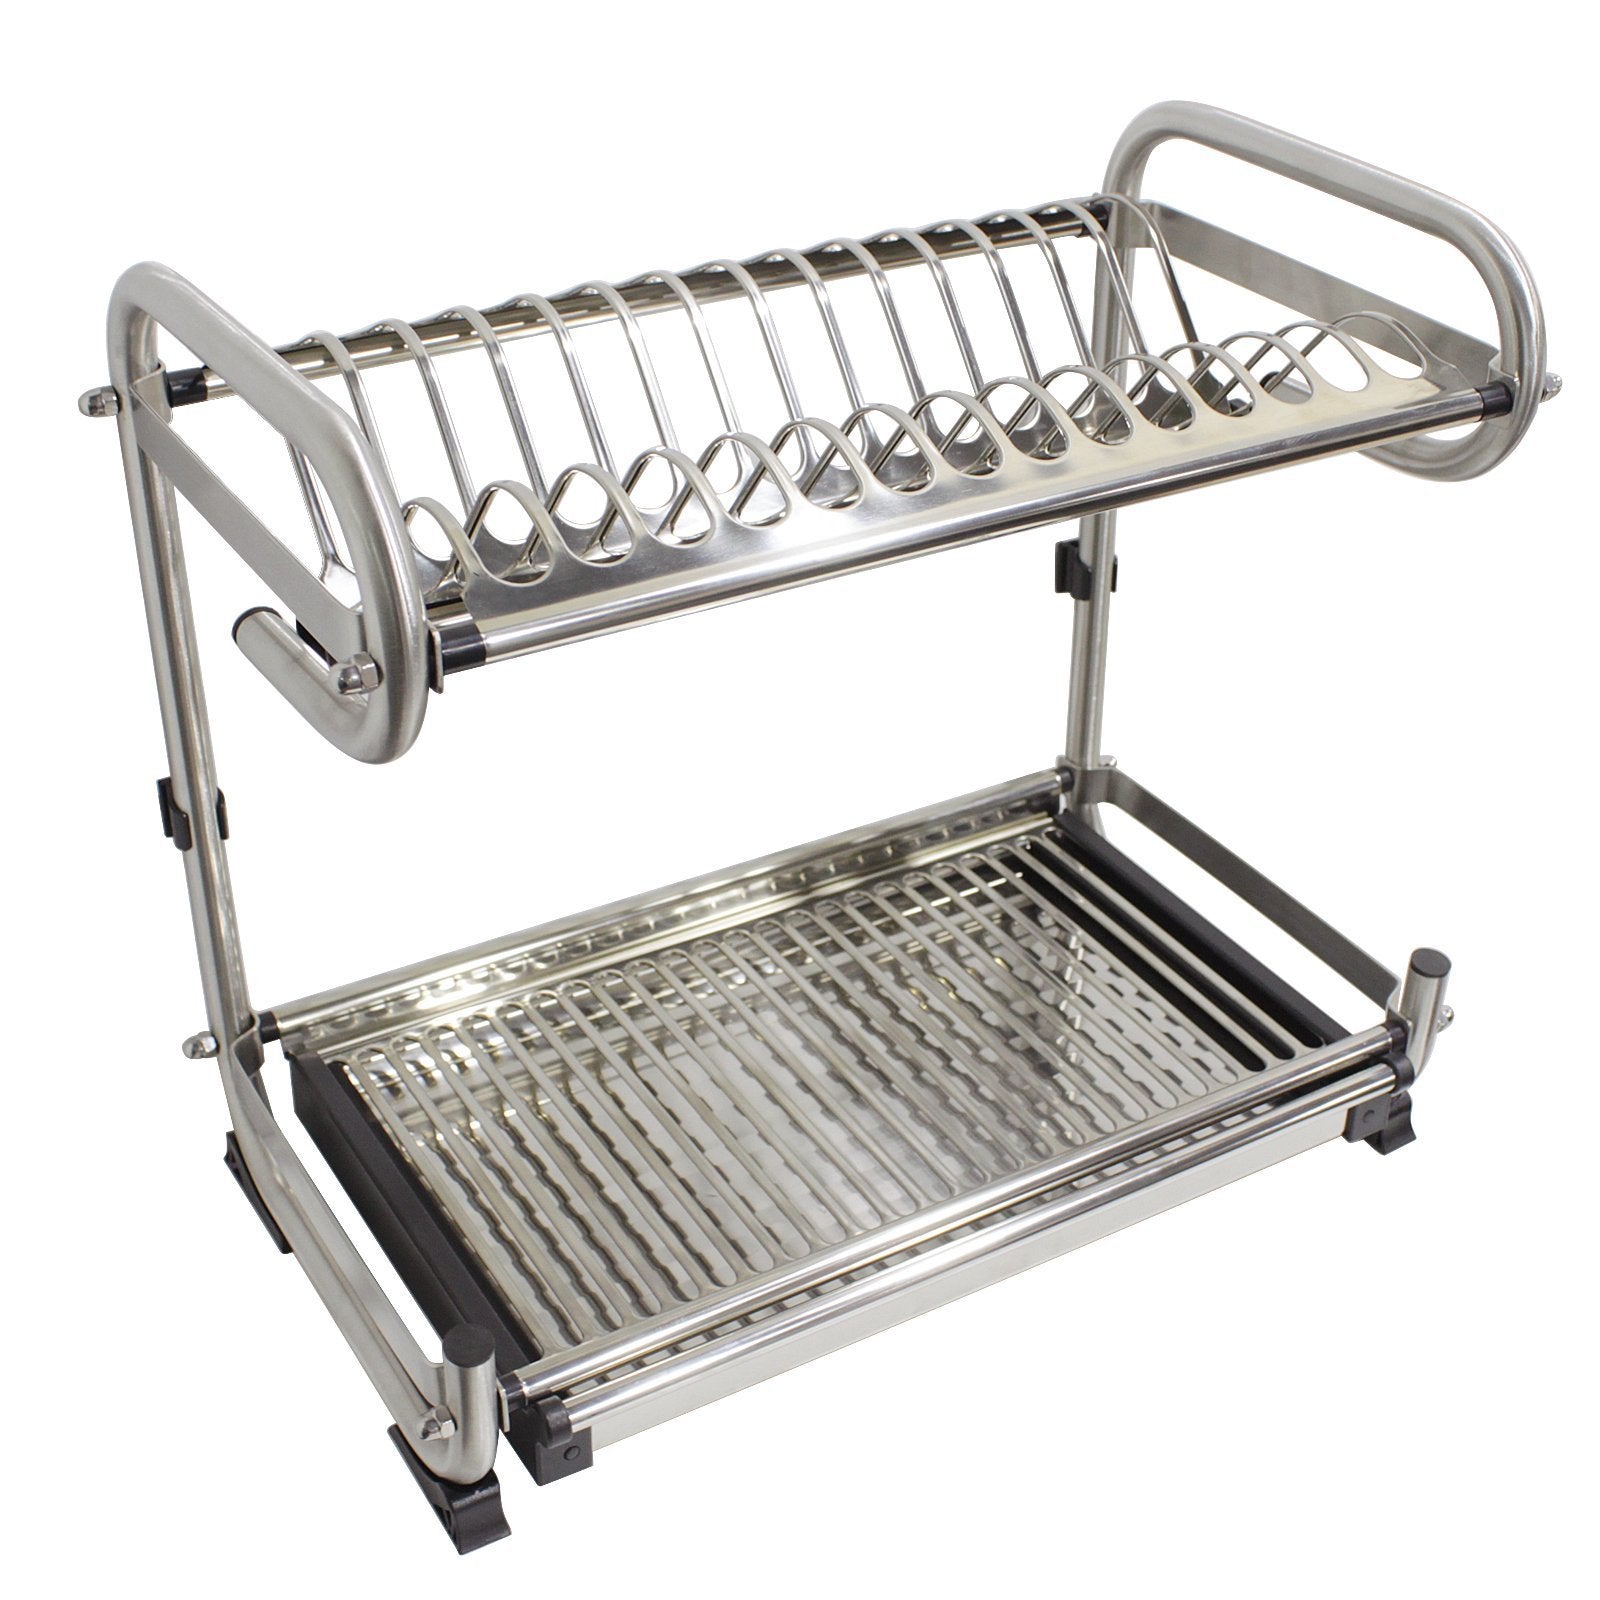 Save probrico dish rack 2 tier 304 stainless steel dry shelf kitchen dishes bowls holder tidy stacking shelf 23 6 inch width